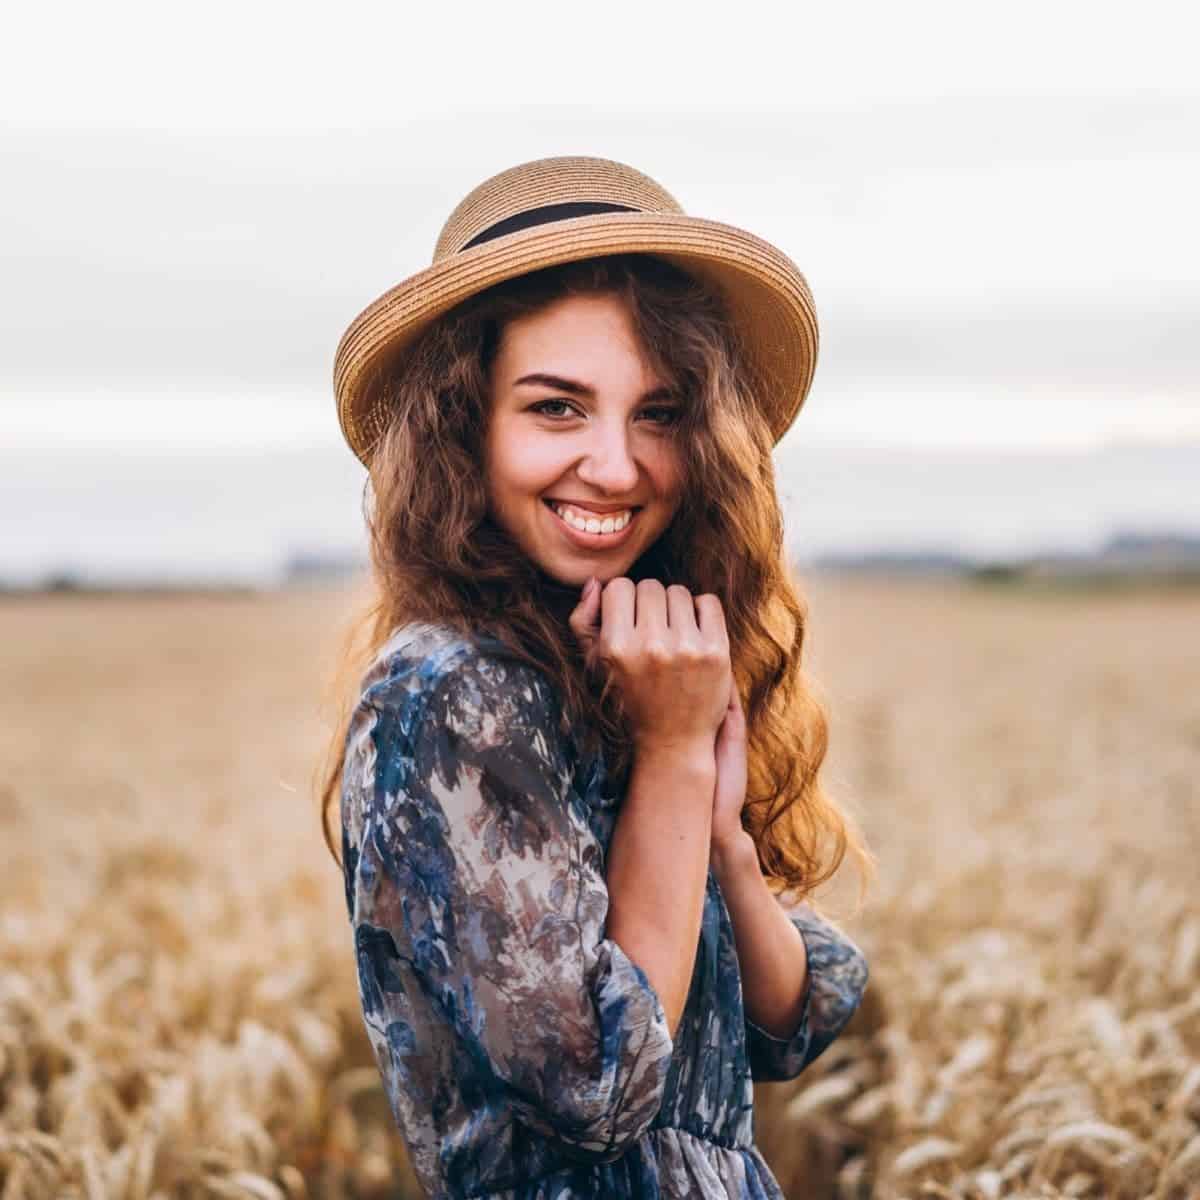 Woman wearing a hat and standing in a field.